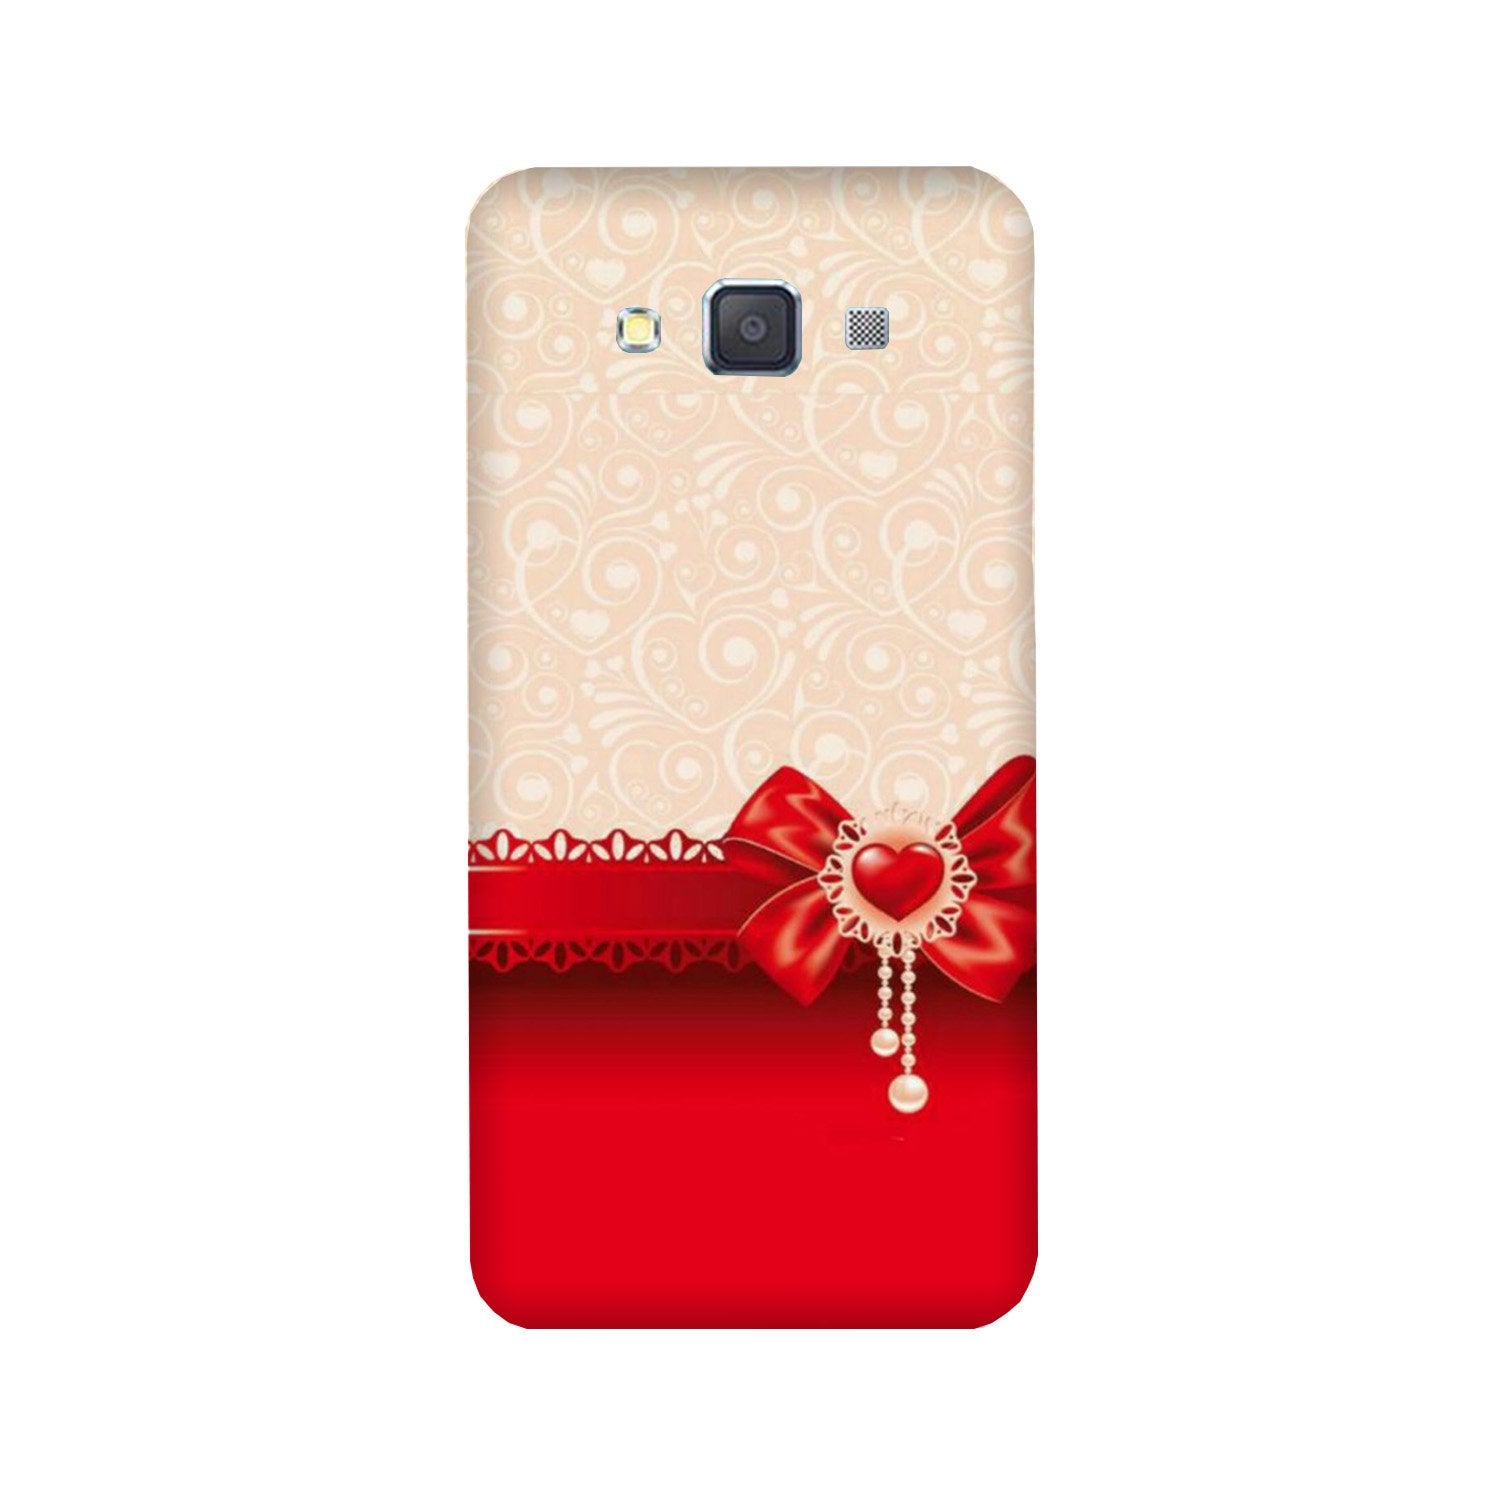 Gift Wrap3 Case for Galaxy J5 (2016)